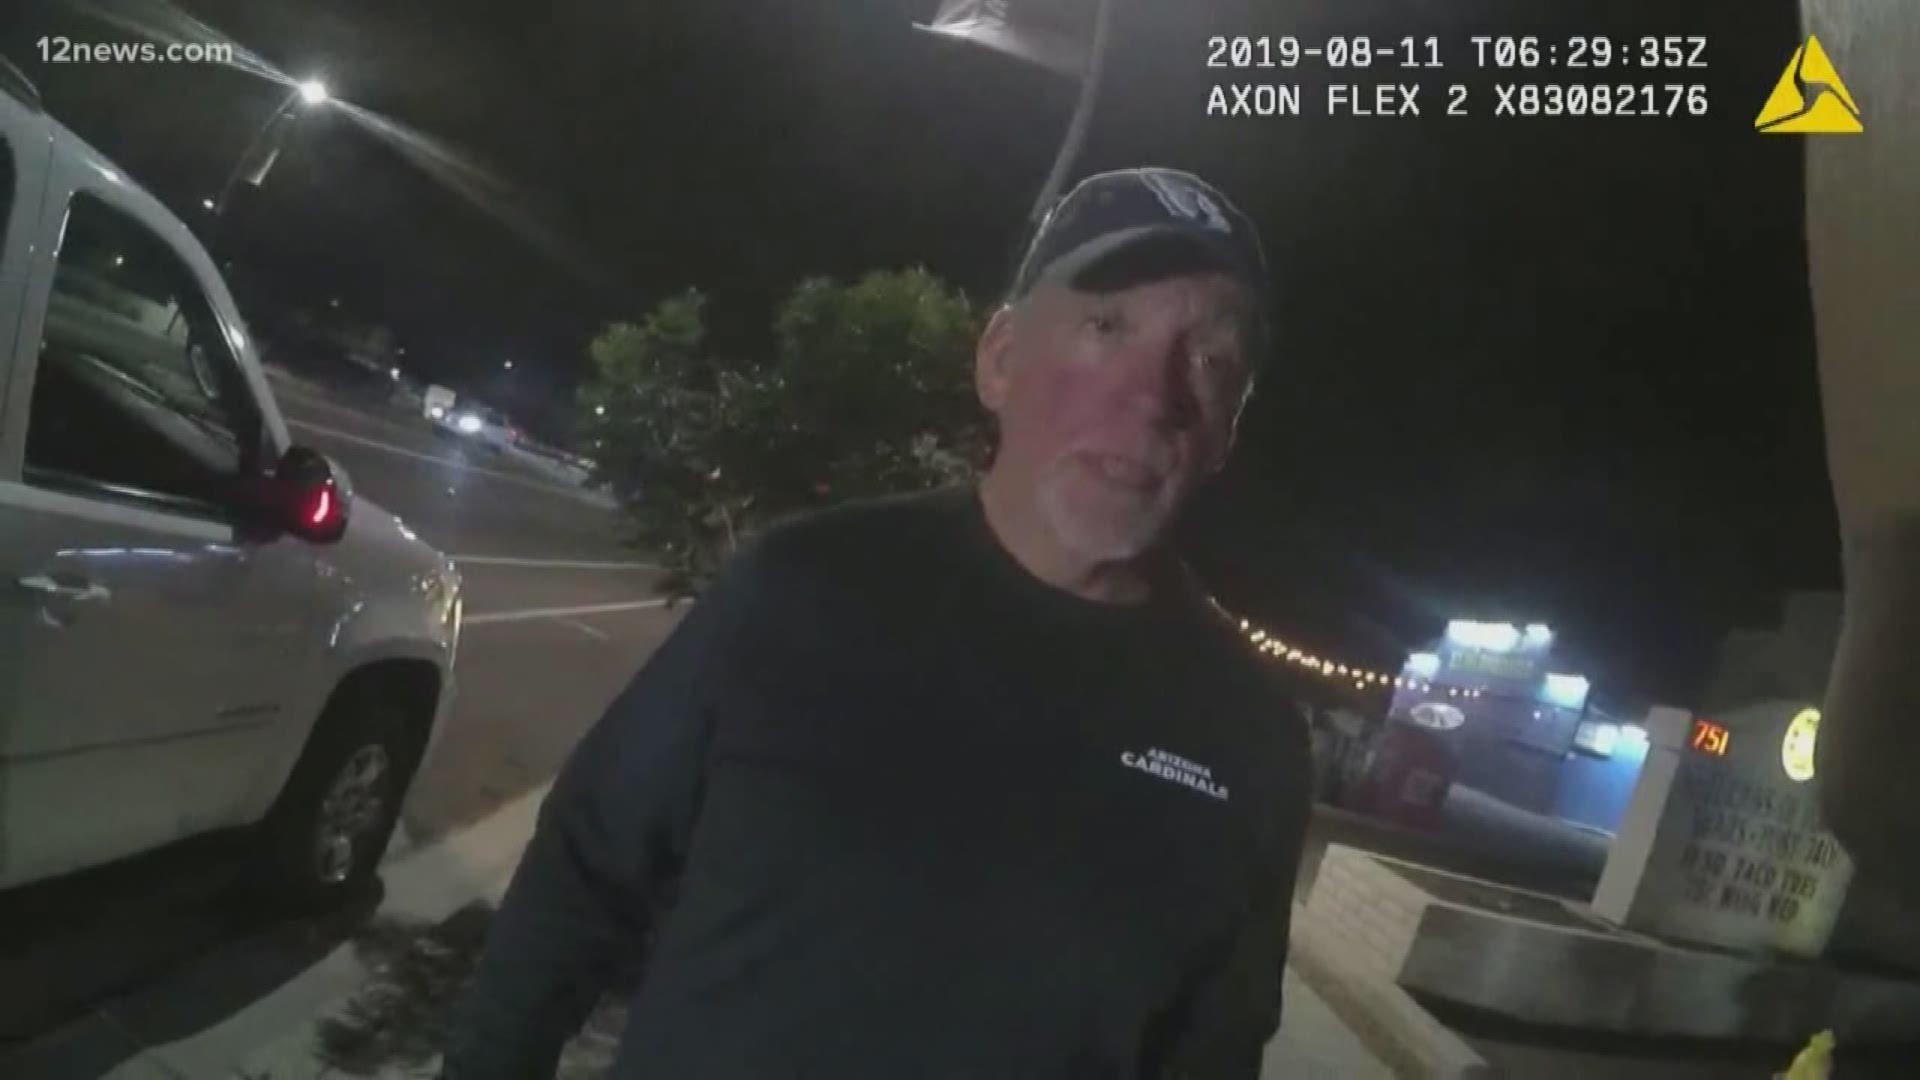 The Chandler police department has released video from the arrest of Cardinals executive Ron Minegar. Police arrested Minegar on suspicion of DUI Saturday night after he admitted to officers he had three to four drinks and failed to complete a field sobriety test.